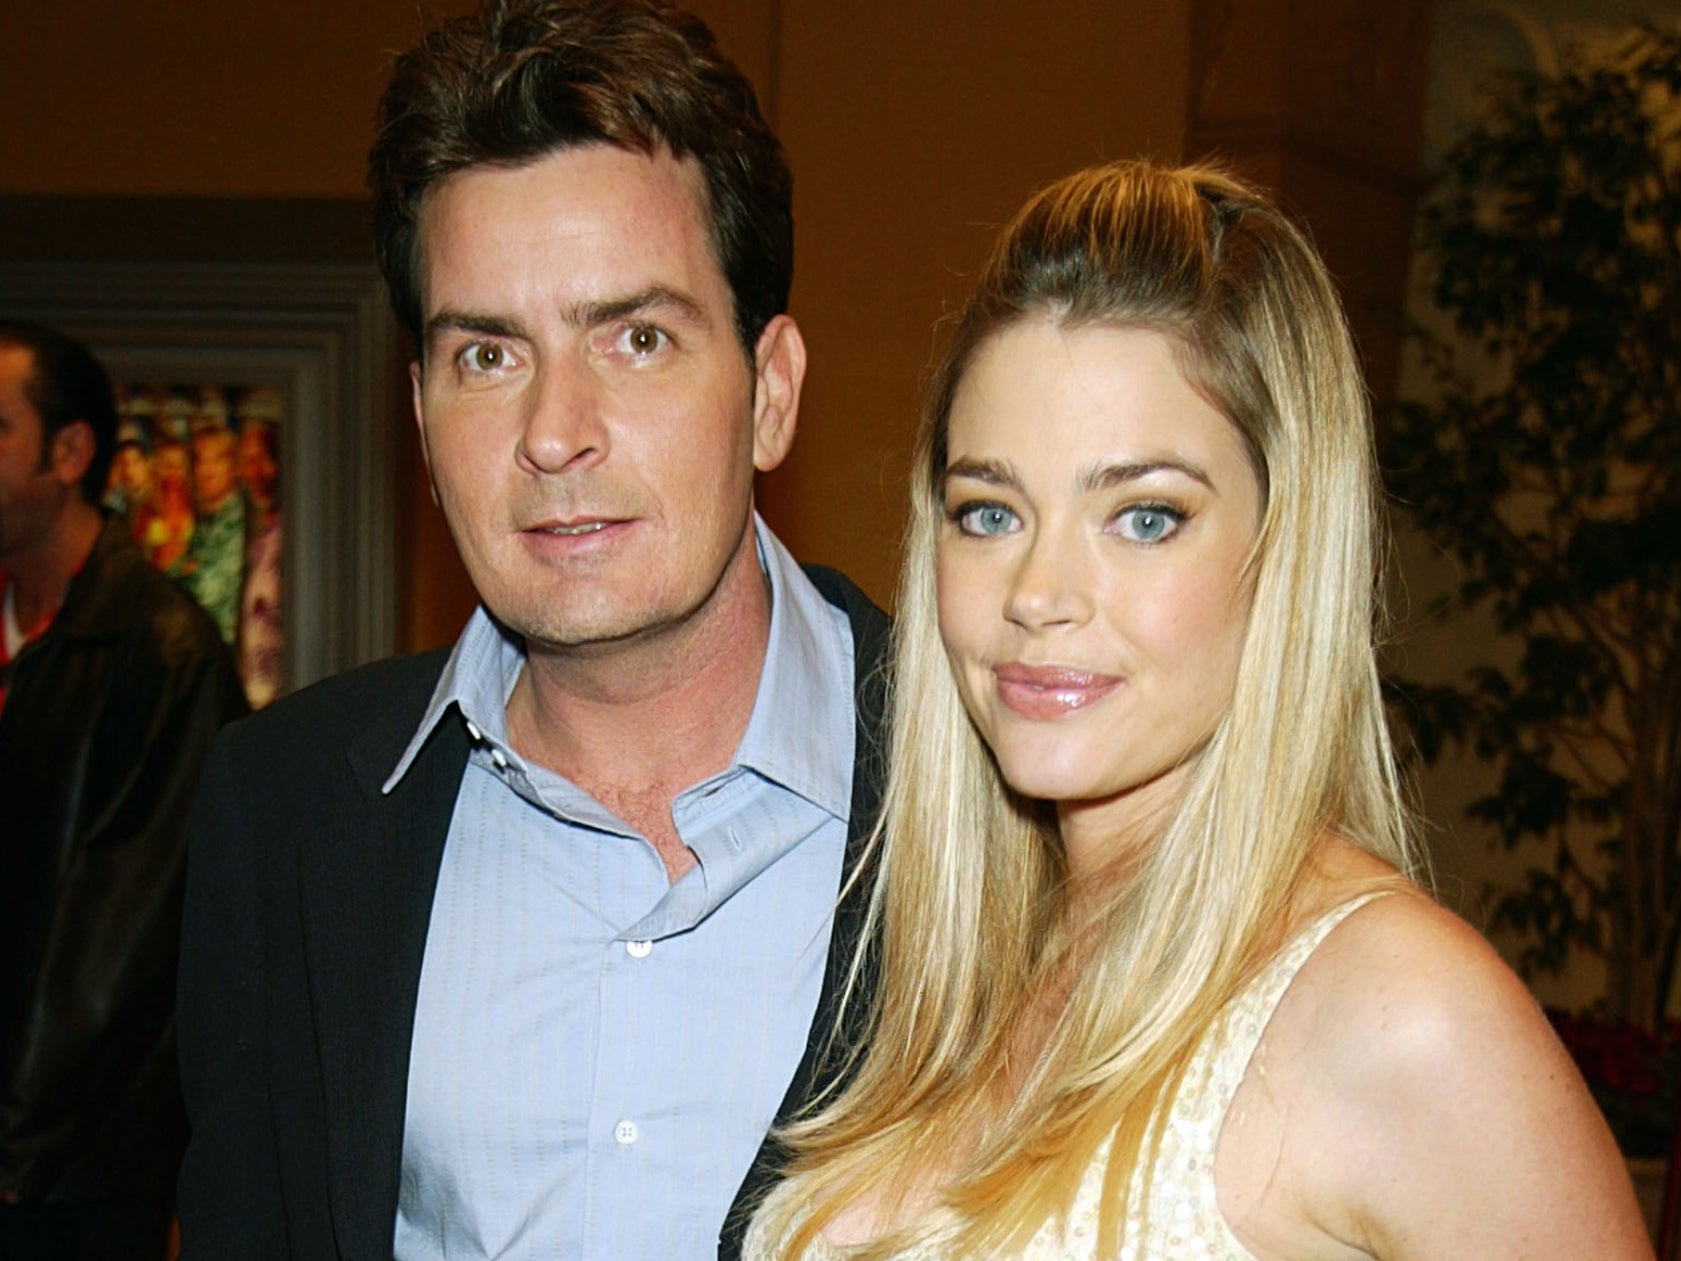 Denise Richards and Charlie Sheen in 2004